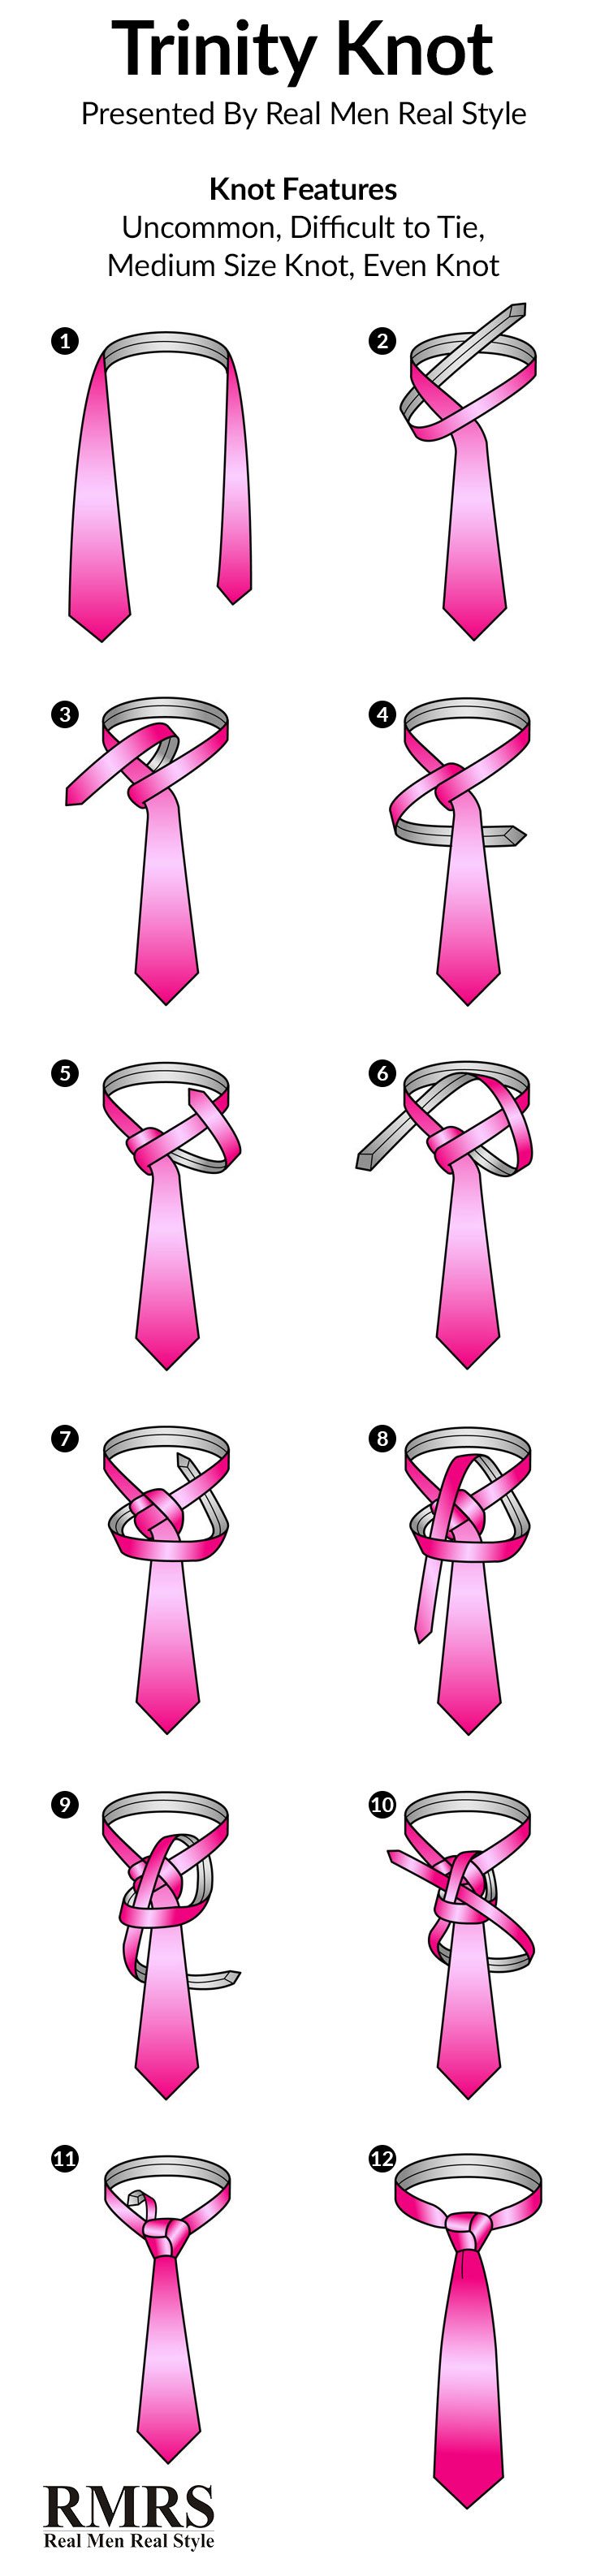 complex-tie-knots-trinity-knot-infographic-image